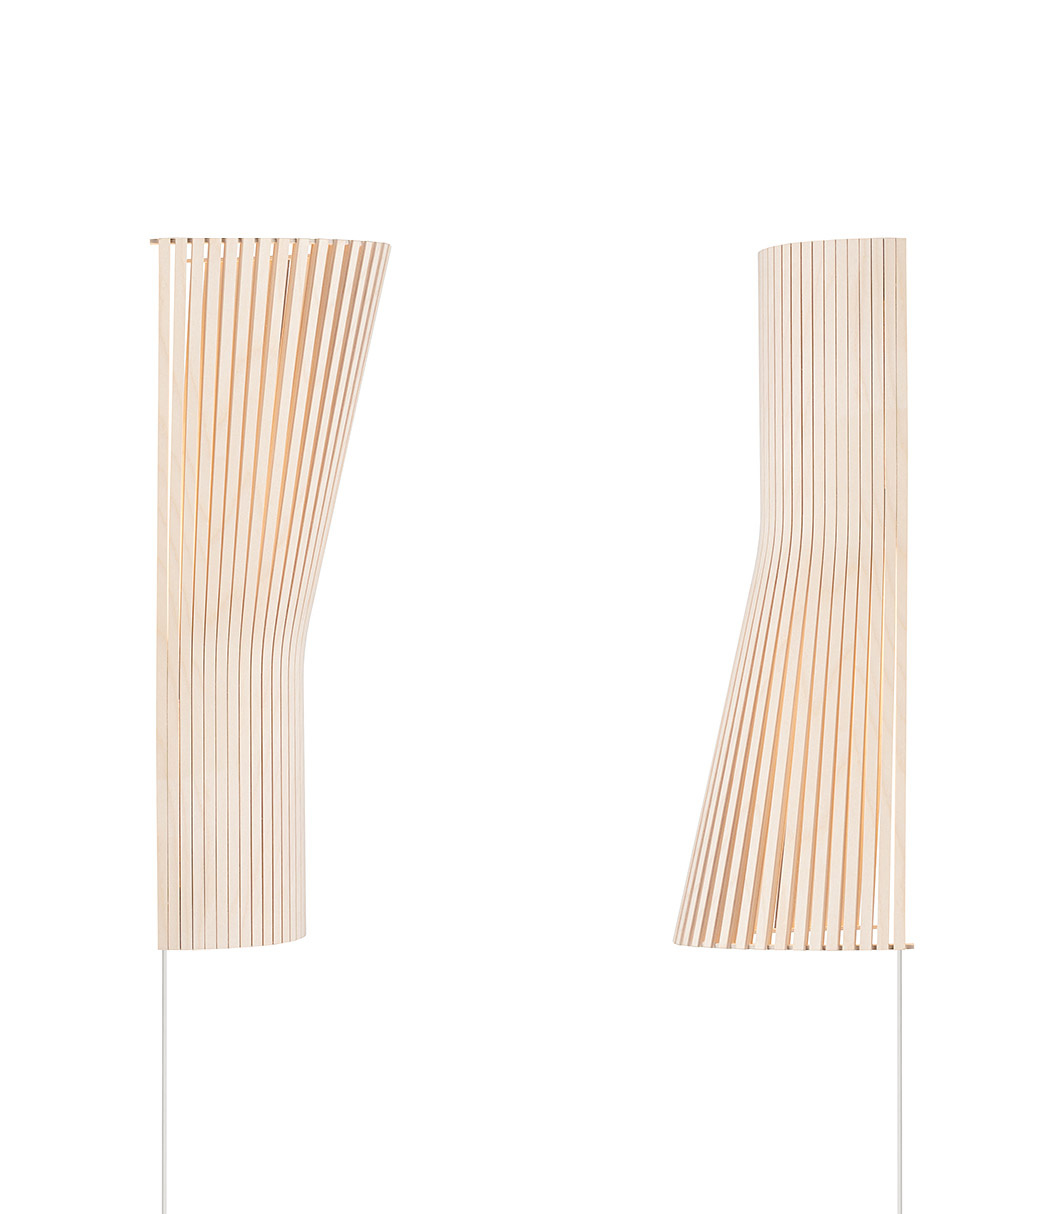 Secto Small 4231 wall lamp is available in natural birch